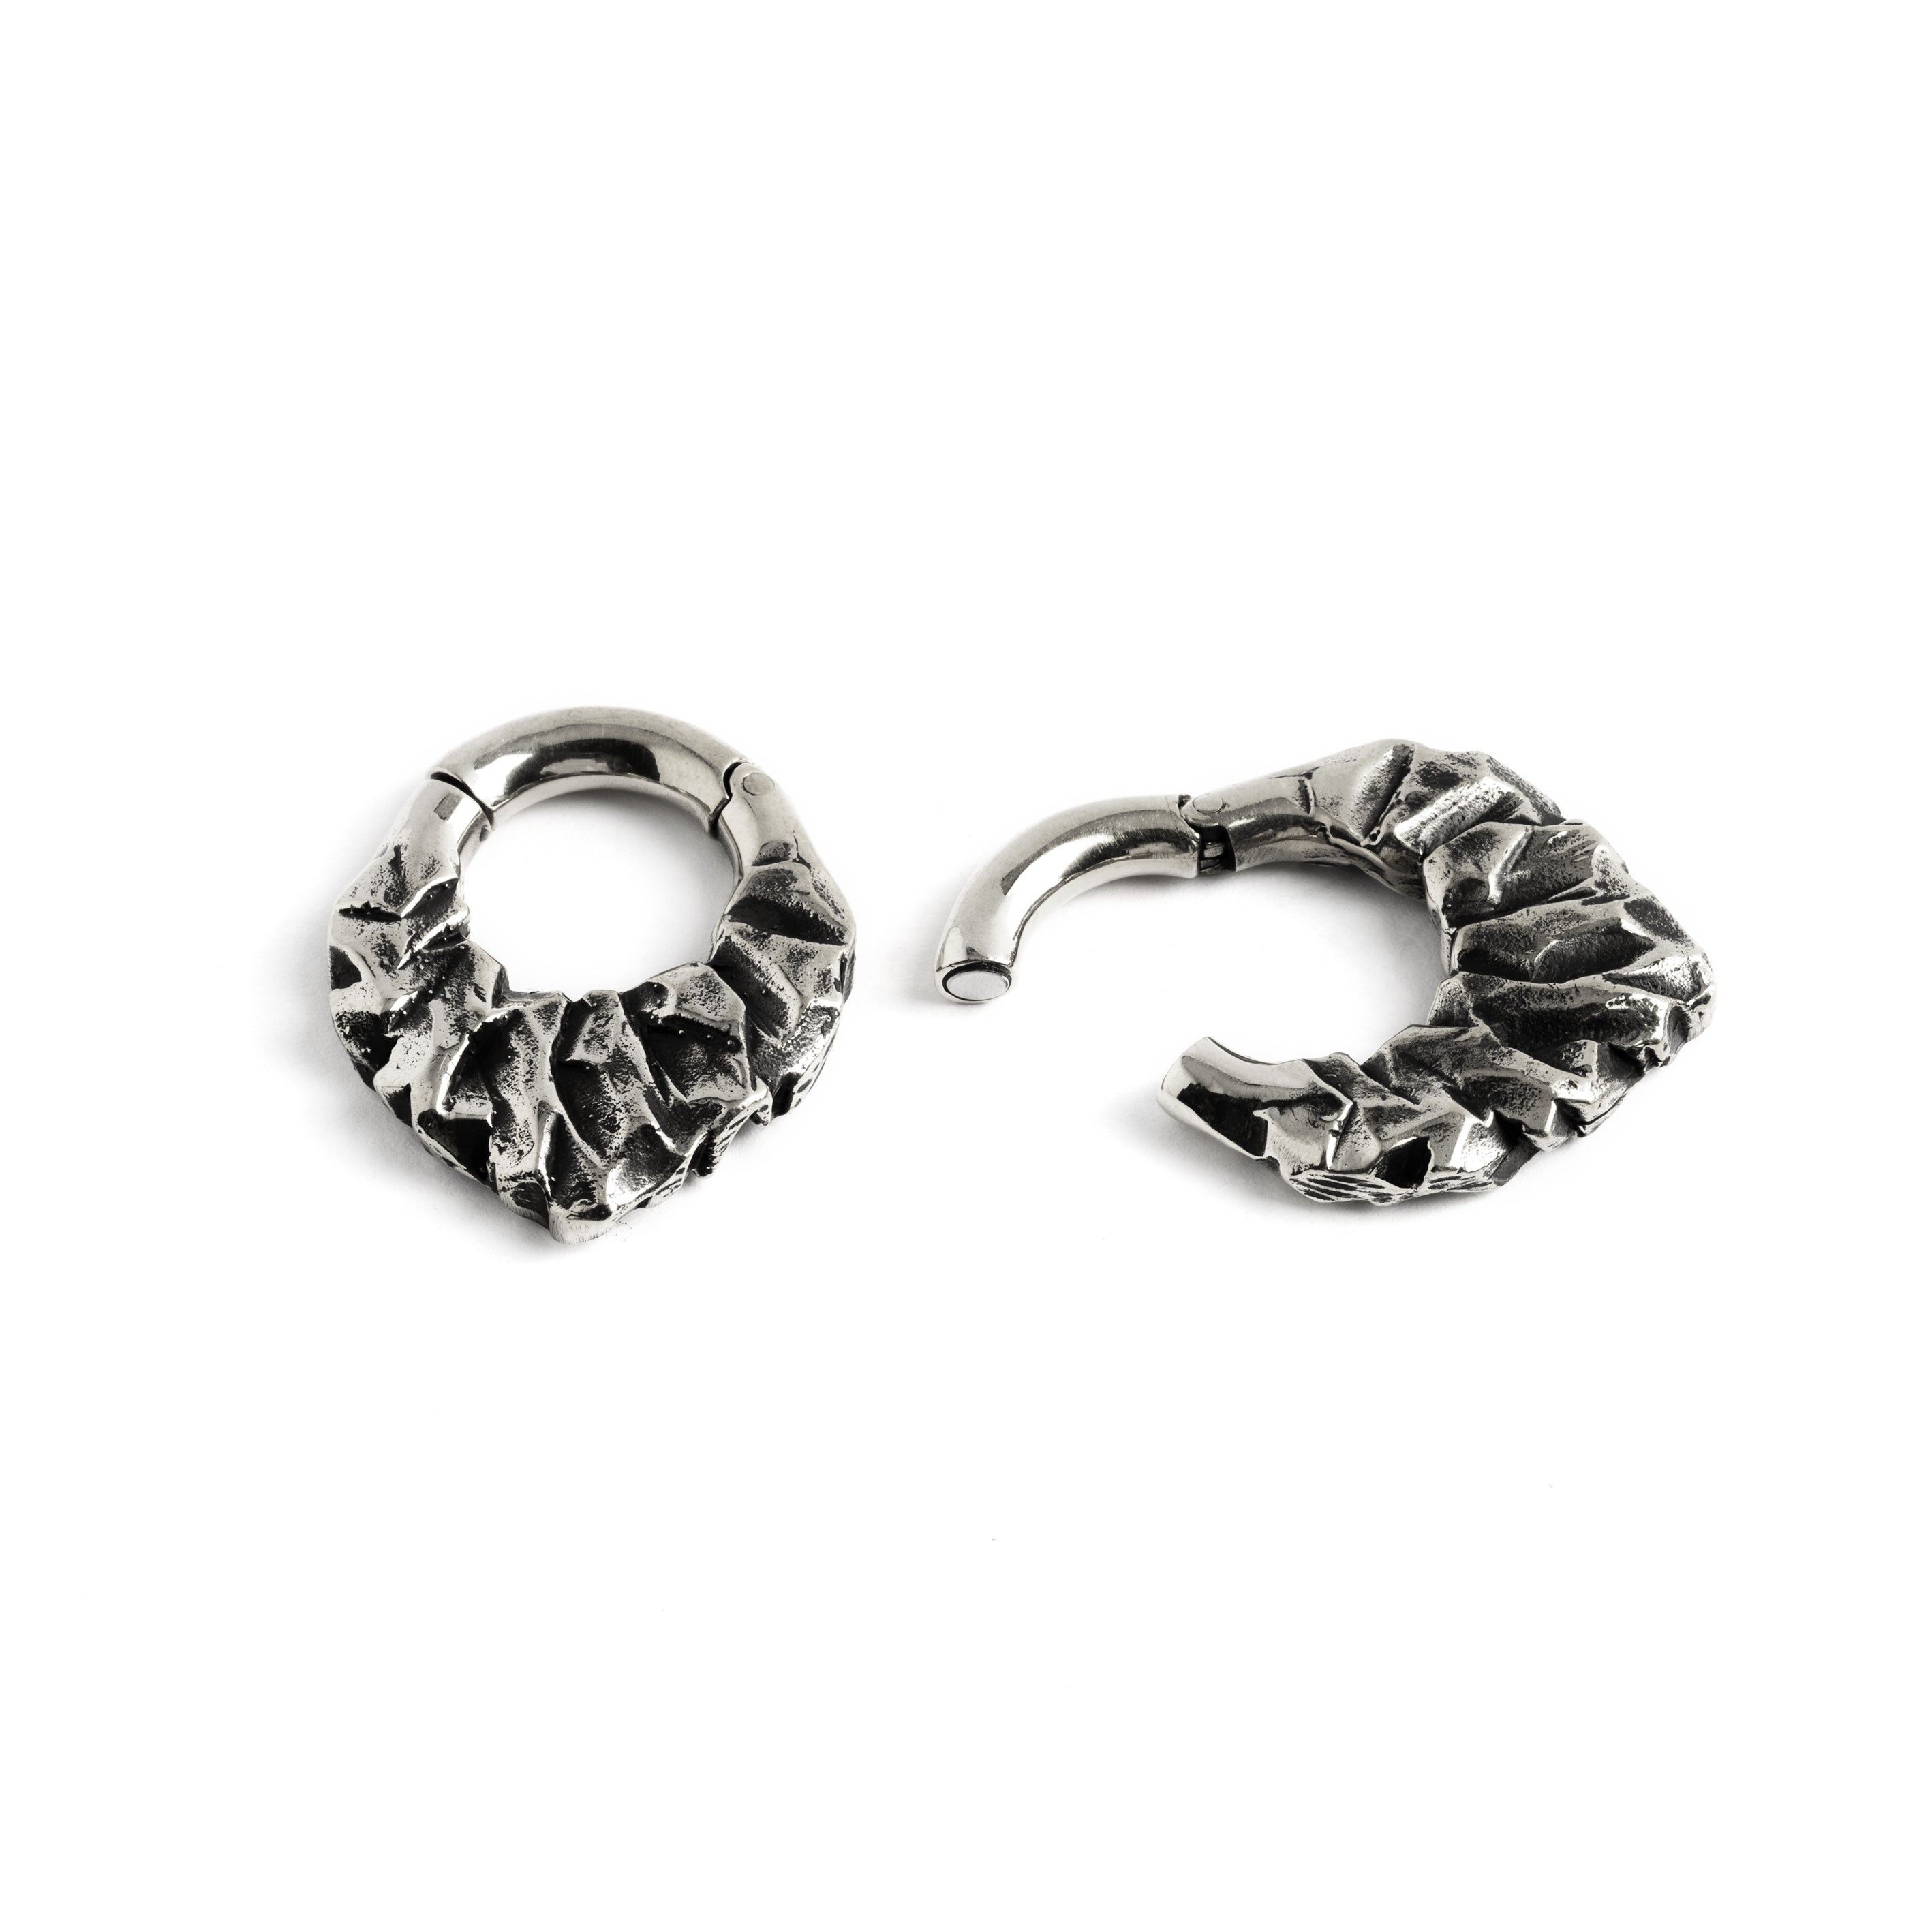 pair of silver brass teardrop shaped ear hoops hangers with rocky texture locking systeml view